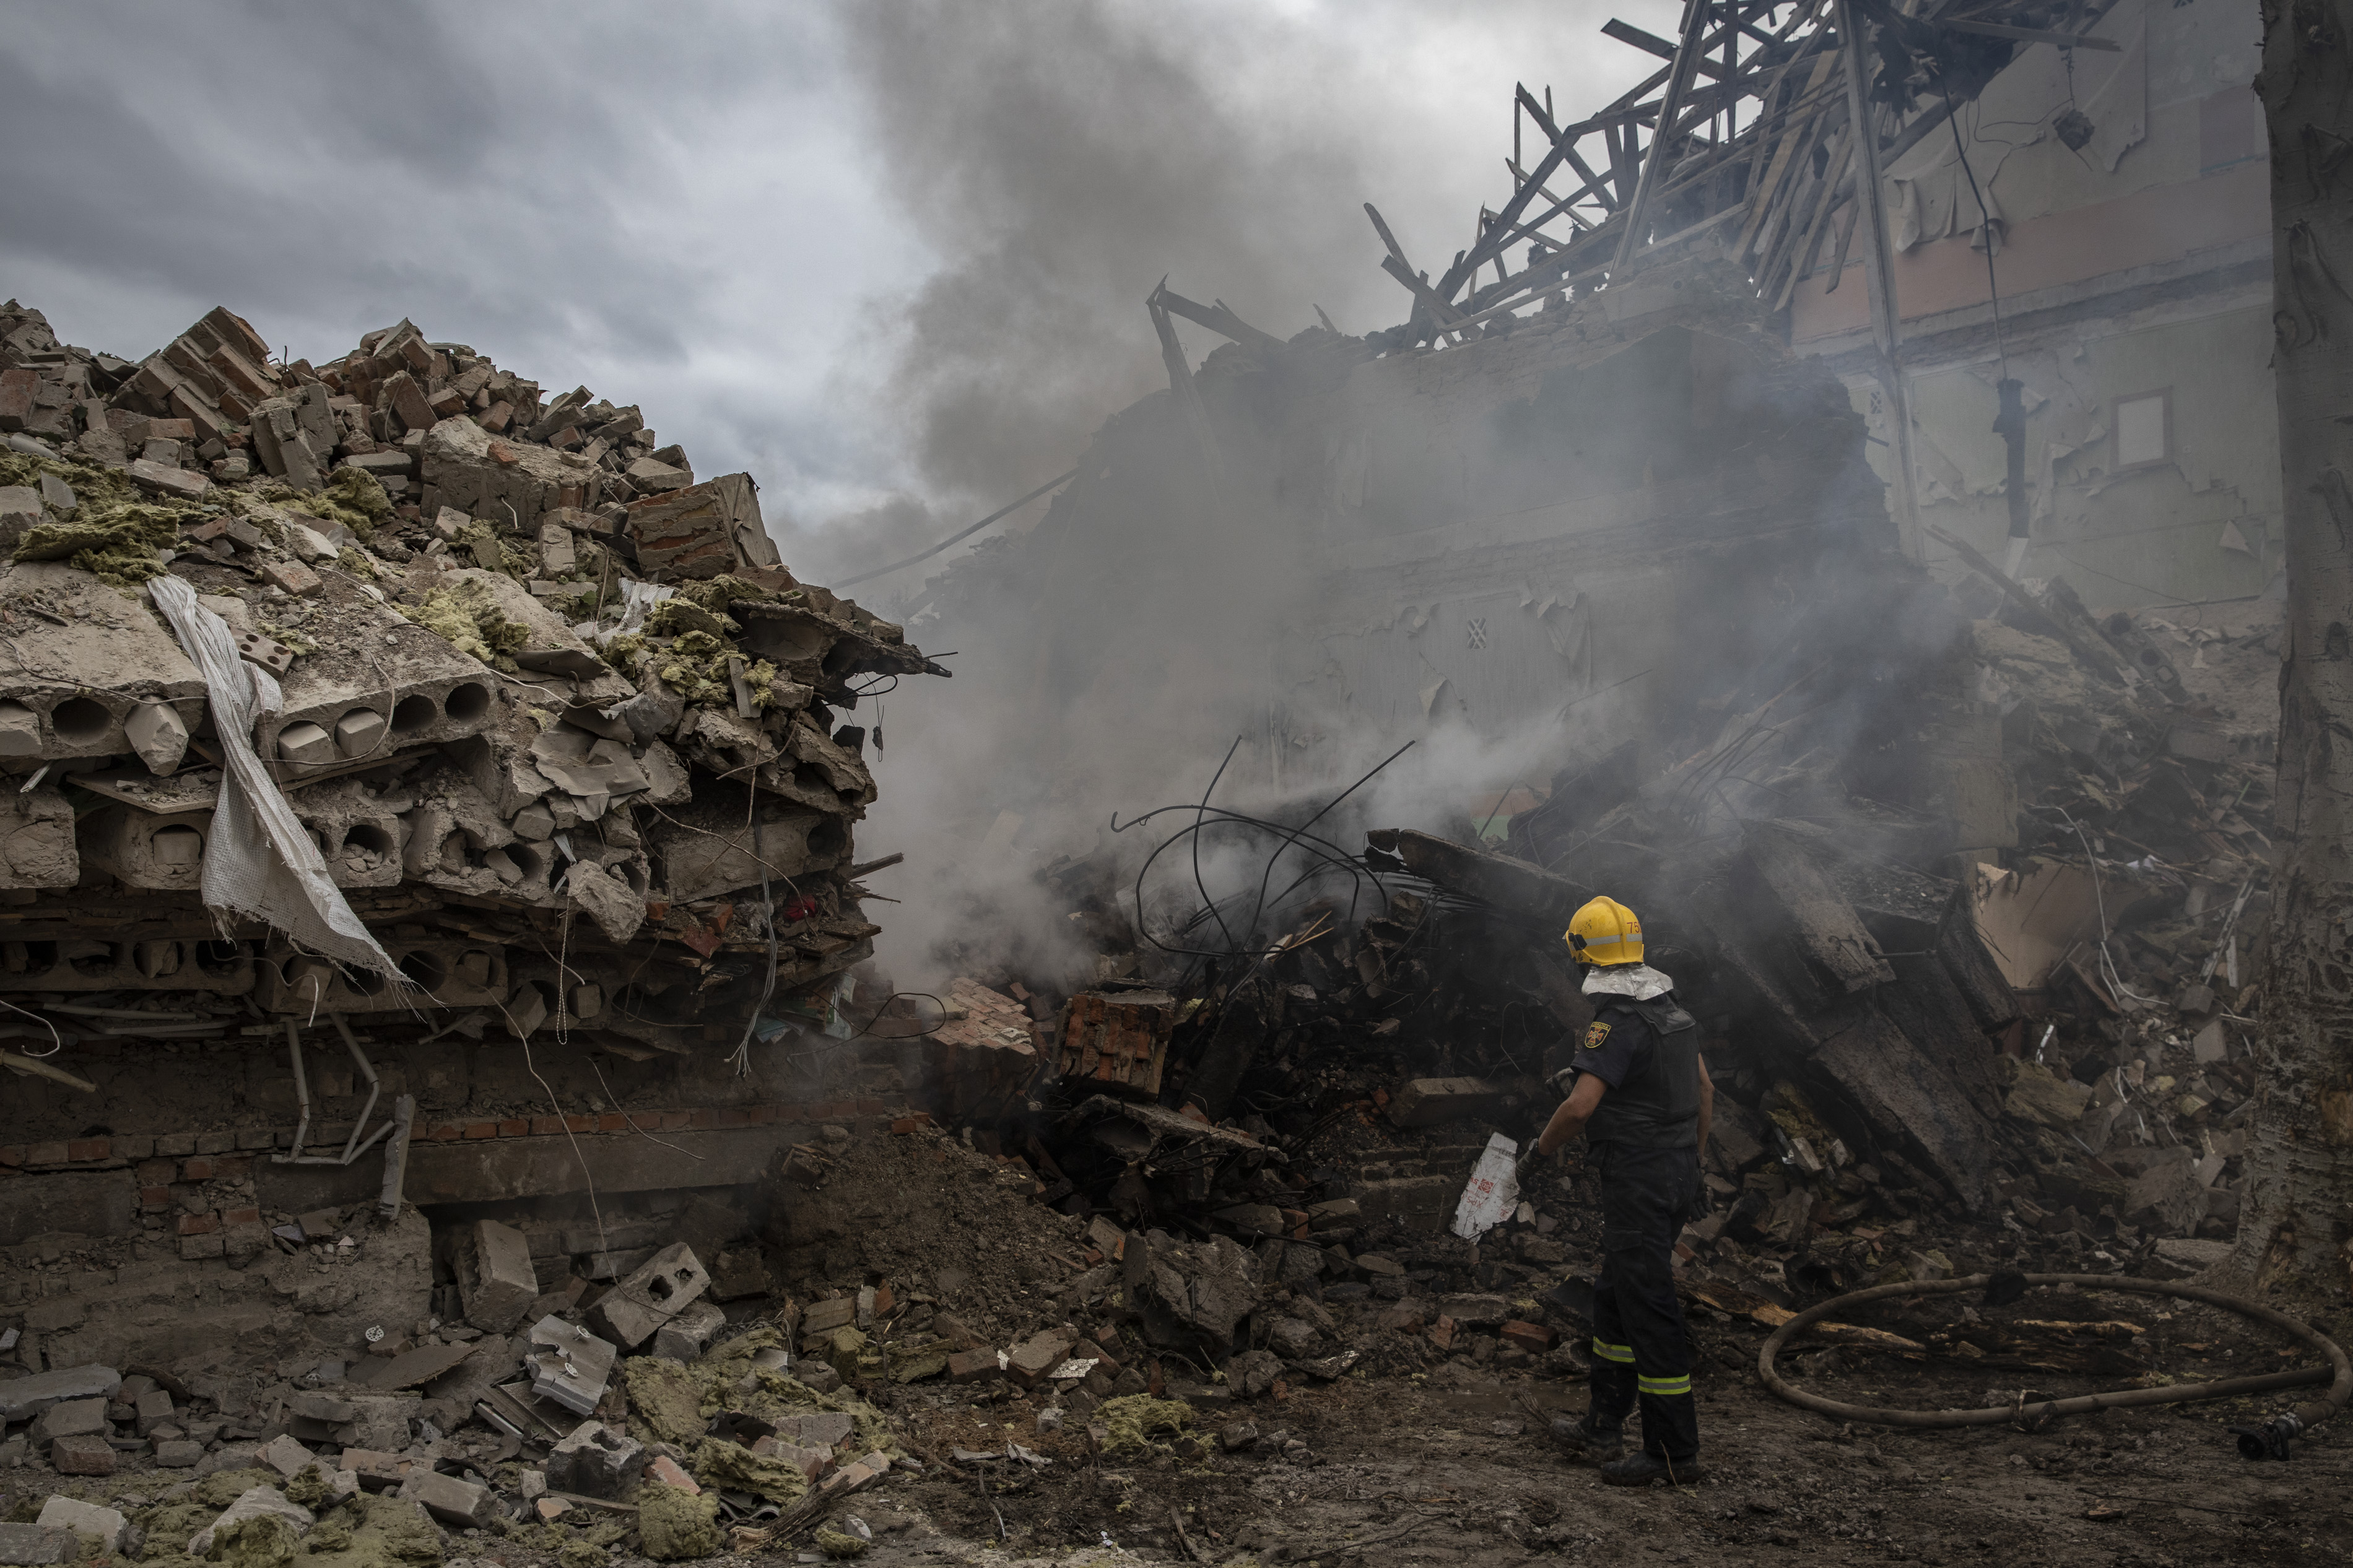 As Russia destroys Donbas, people leave homes in mandatory evacuation drive (PHOTOS)